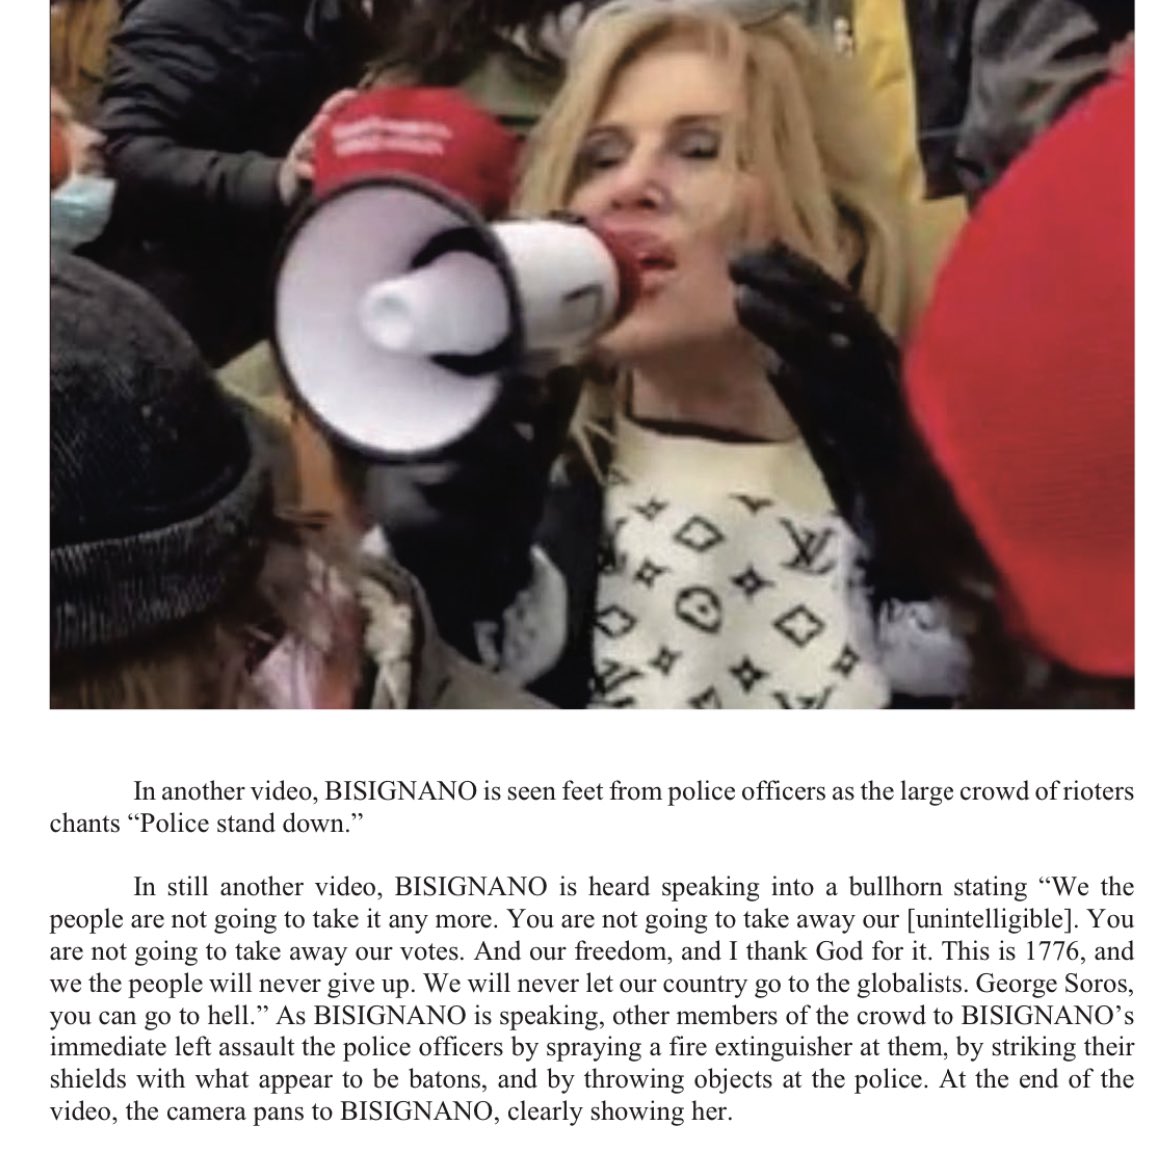 A new arrest today — a woman with a bullhorn at the Capitol turns out to be a business owner in Beverly Hills, CA who confirmed her attendance by tweet, posted video of herself, and gave a 2h interview about her participation to the Beverly Hills Courier.  https://www.justice.gov/opa/page/file/1356556/download